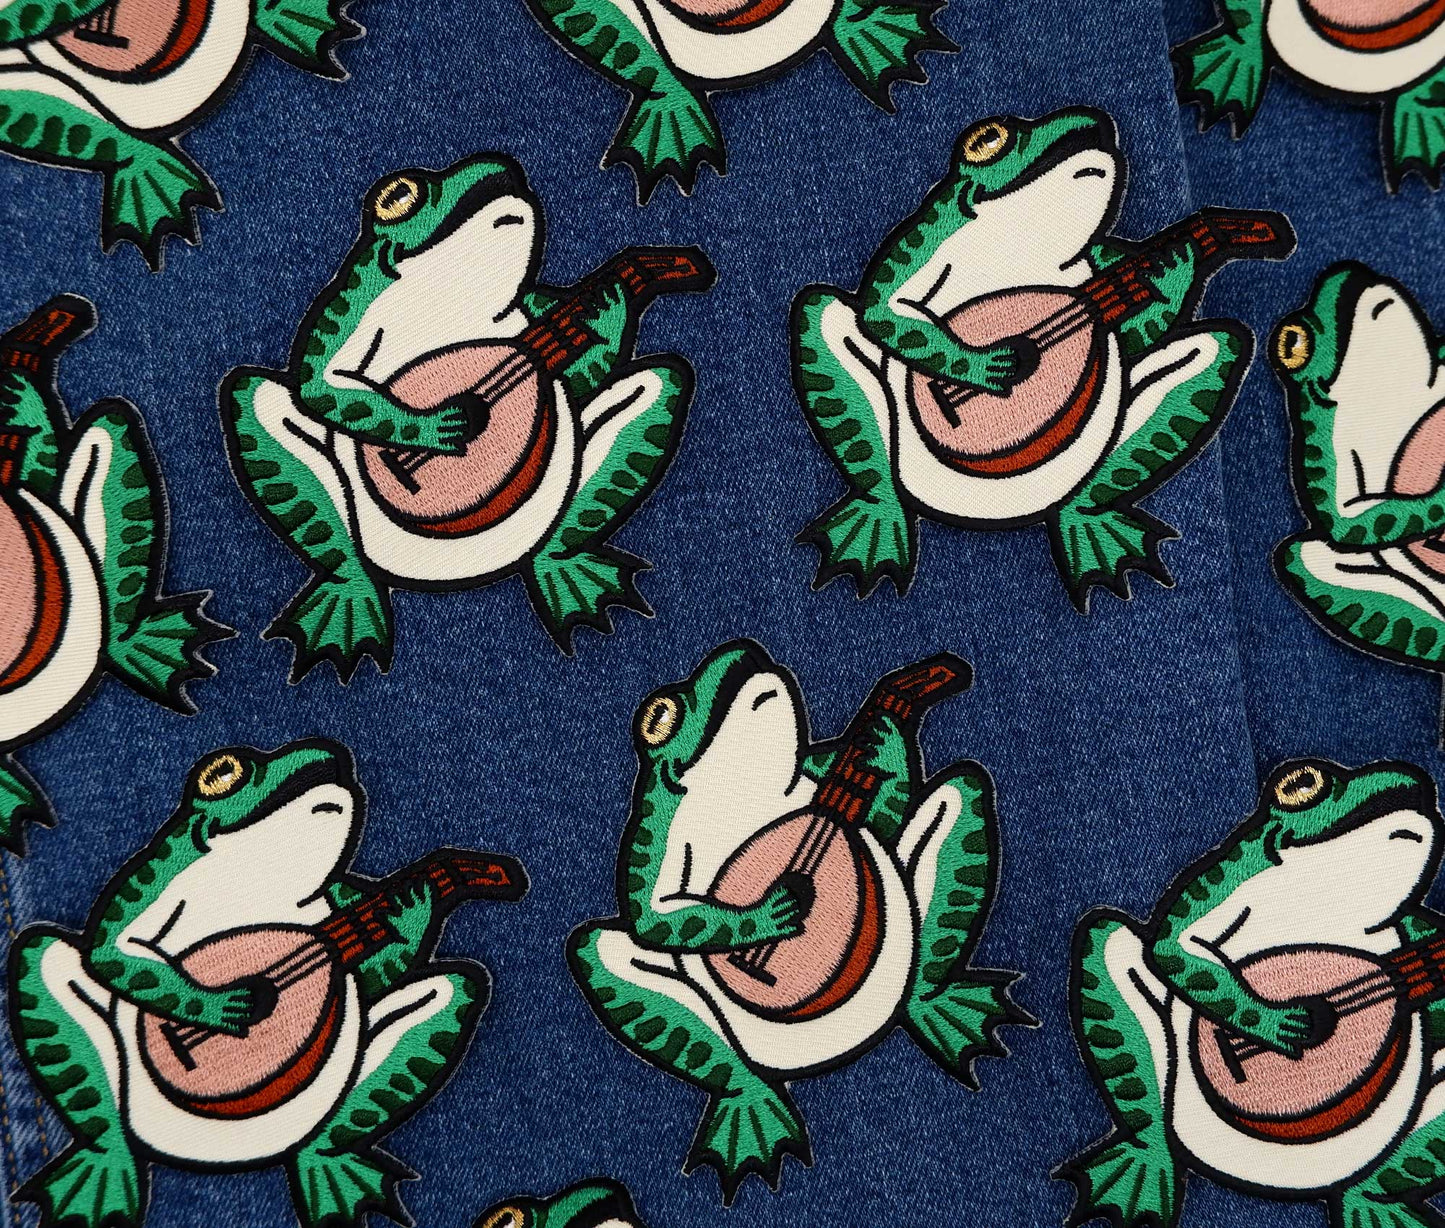 Frog Serenade - Embroidered Patch